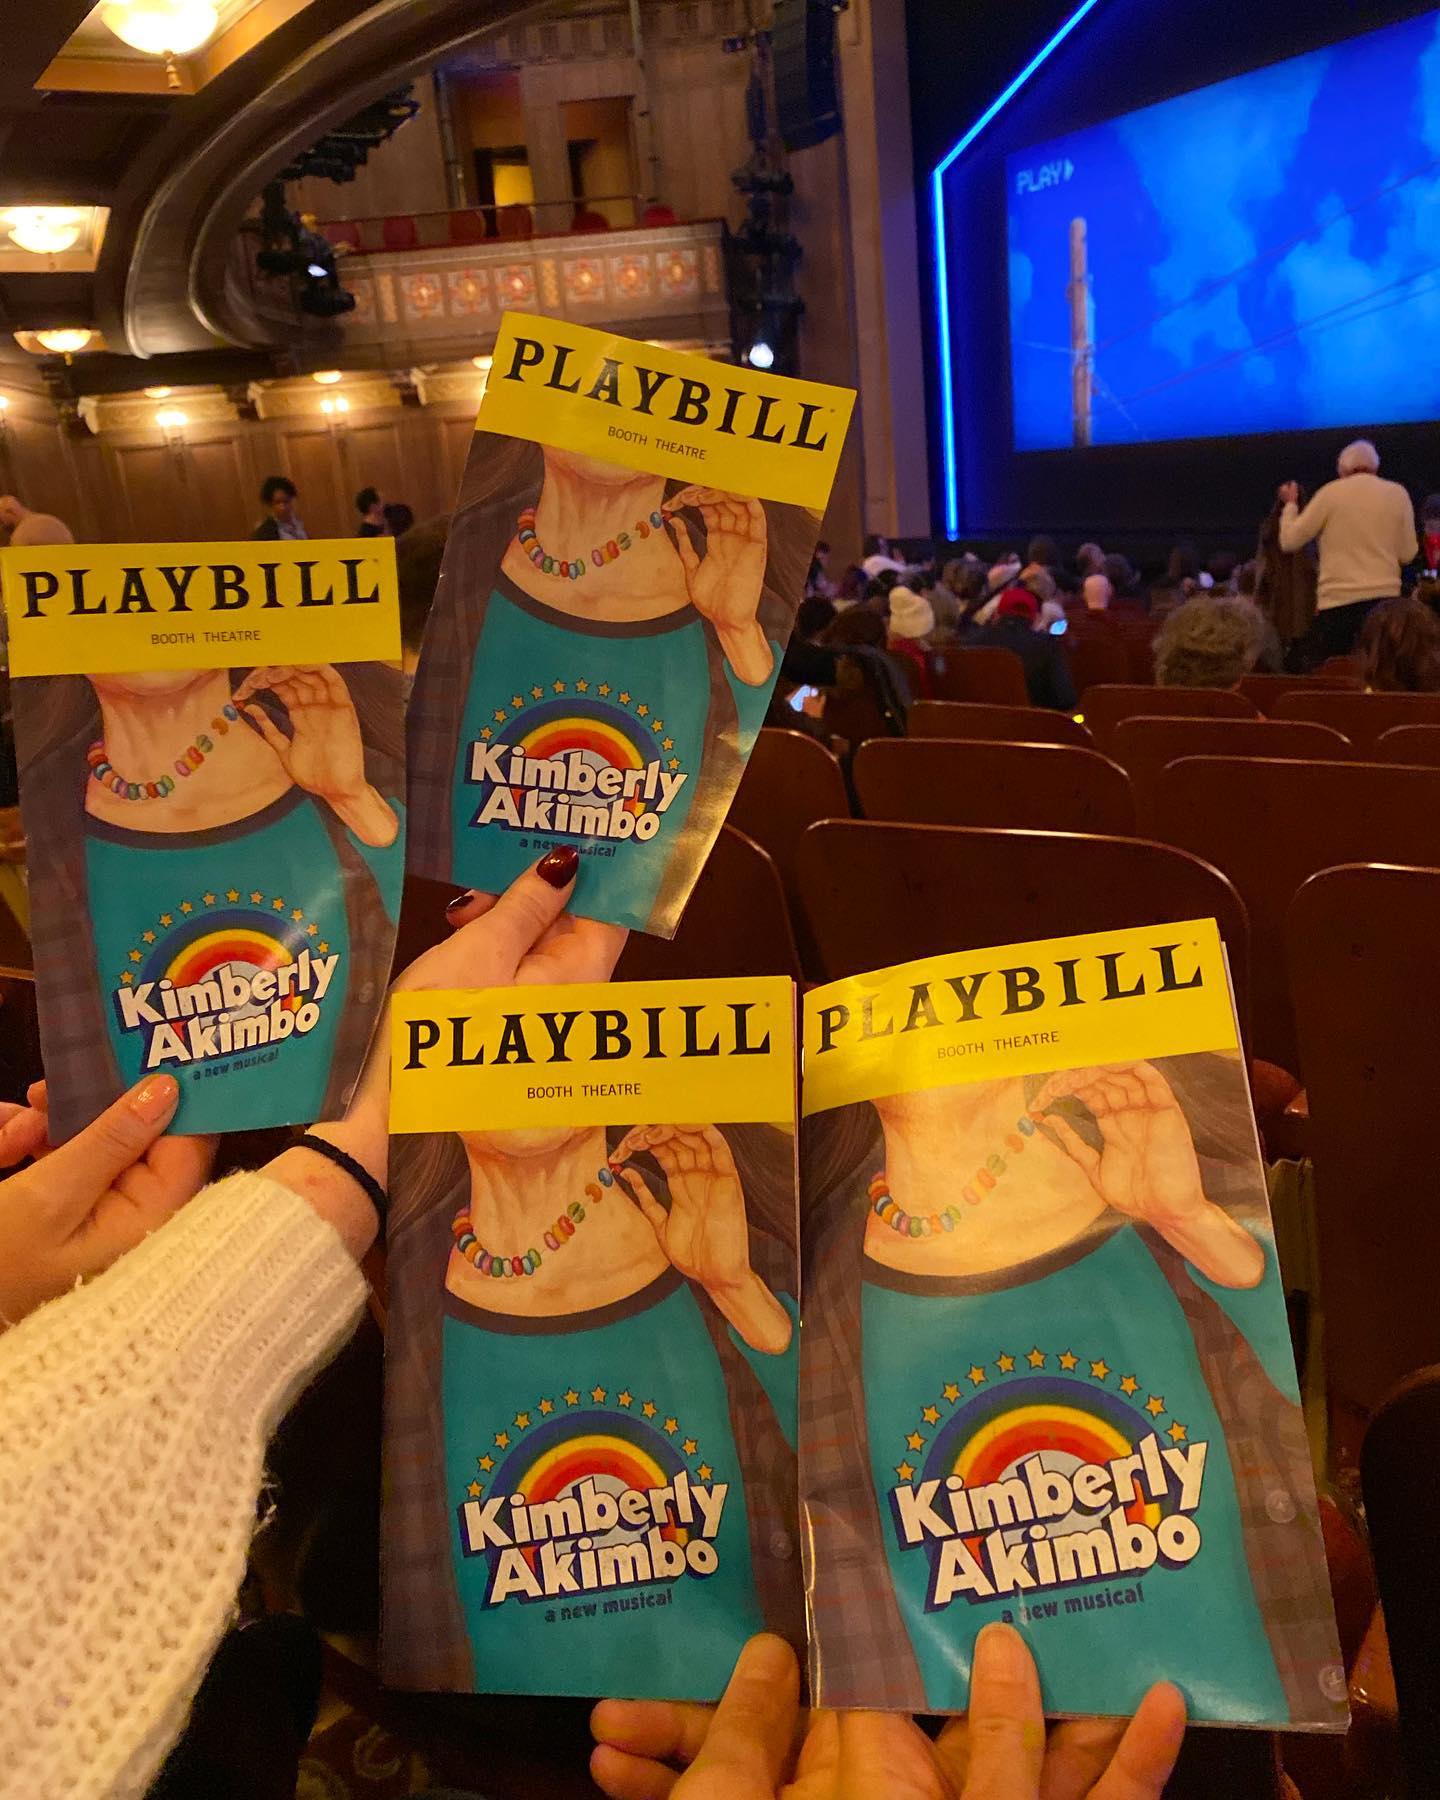 @akimbomusical does something magical that I can’t articulate.  It delights and devastates so congruently that in the end I feel FULL from the experience, my heart expanded. #broadwaymusical #musicaltheatre #broadway #victoriaclark #justincooley #bonniemilligan #jeaninetesori #kimberlyakimbo #nyctheatrelife #nyctheatre #ilovemusicals #ilovetheatre